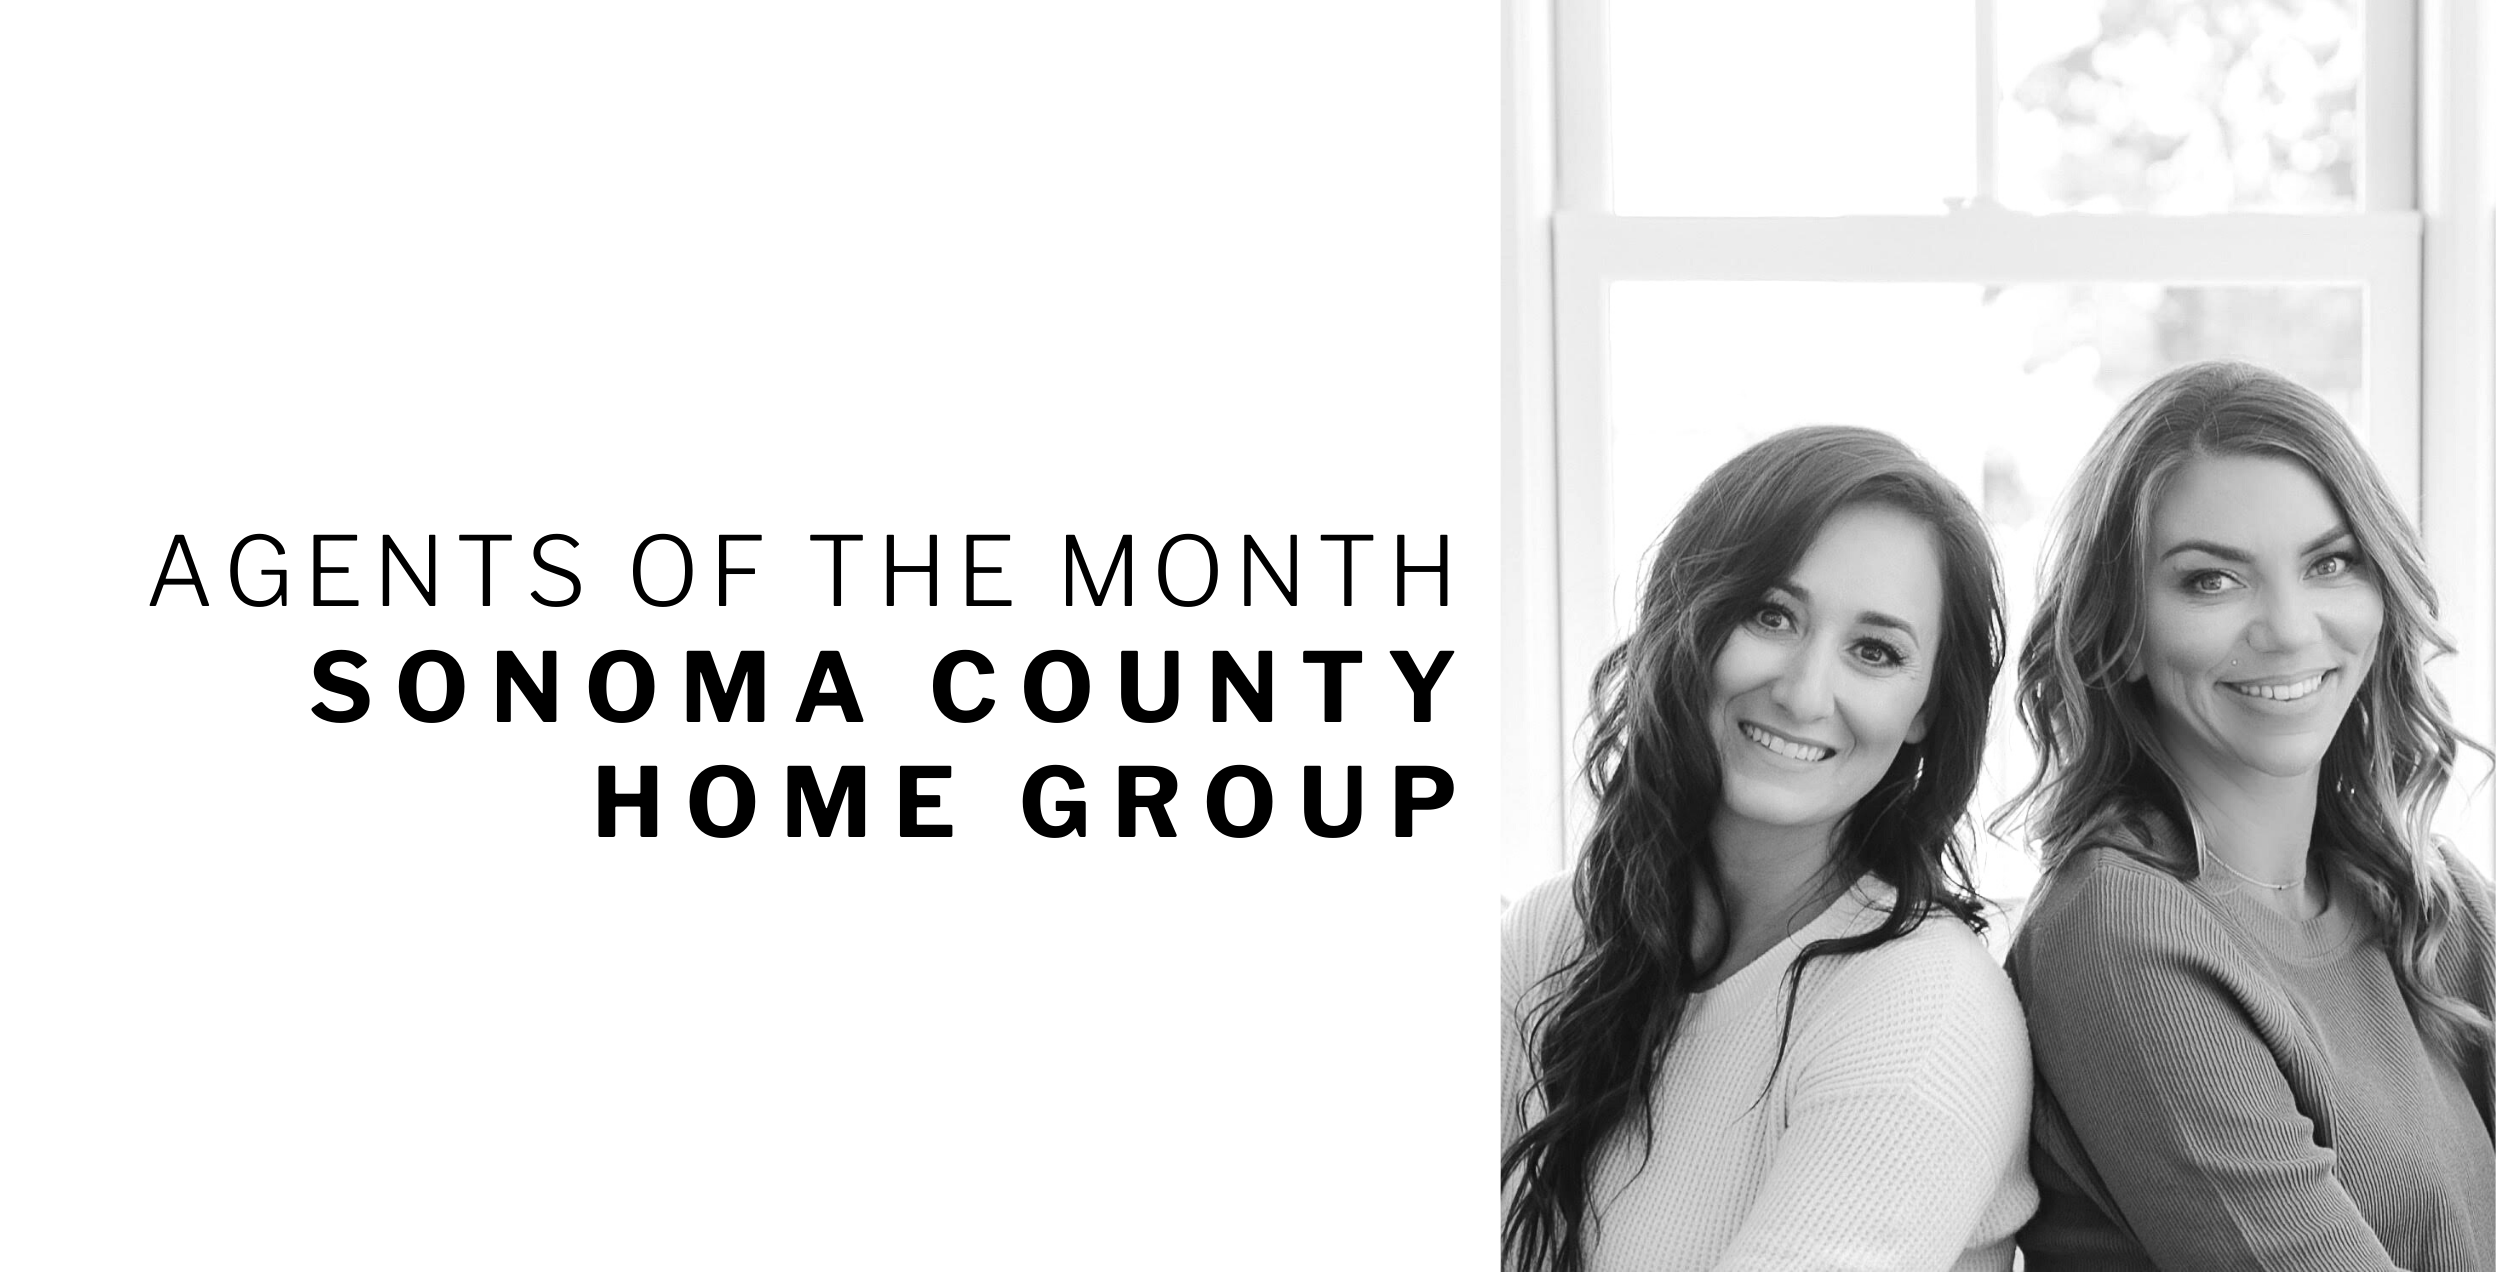 Agents of the Month Sonoma County Home Group